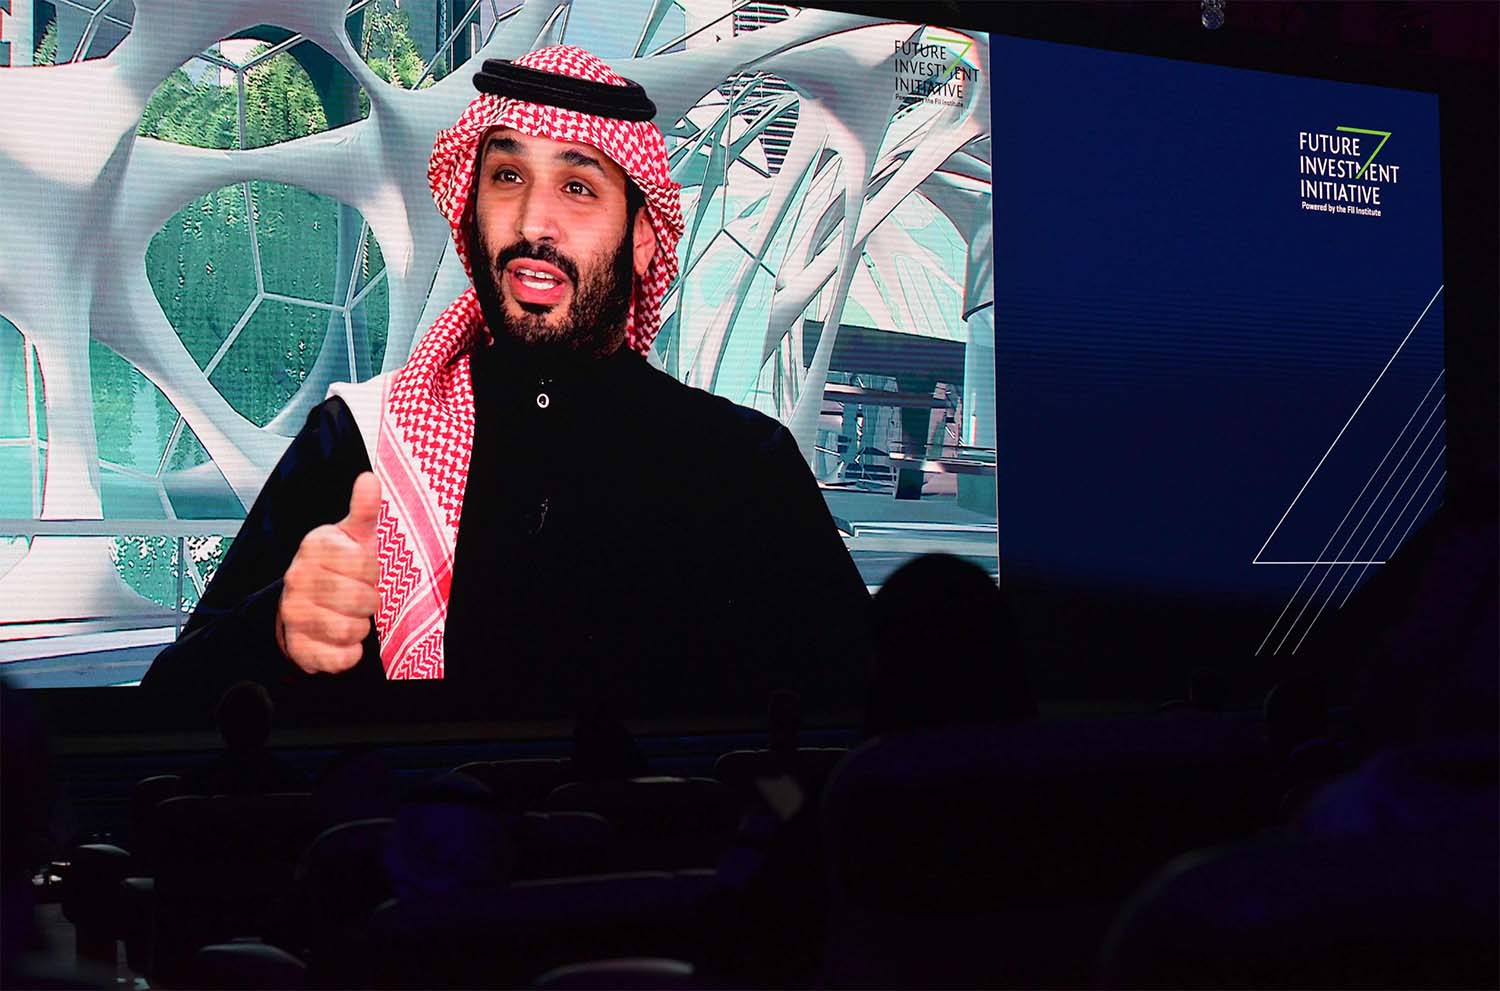 Over 100 investment projects will be announced for Riyadh over the next couple of months